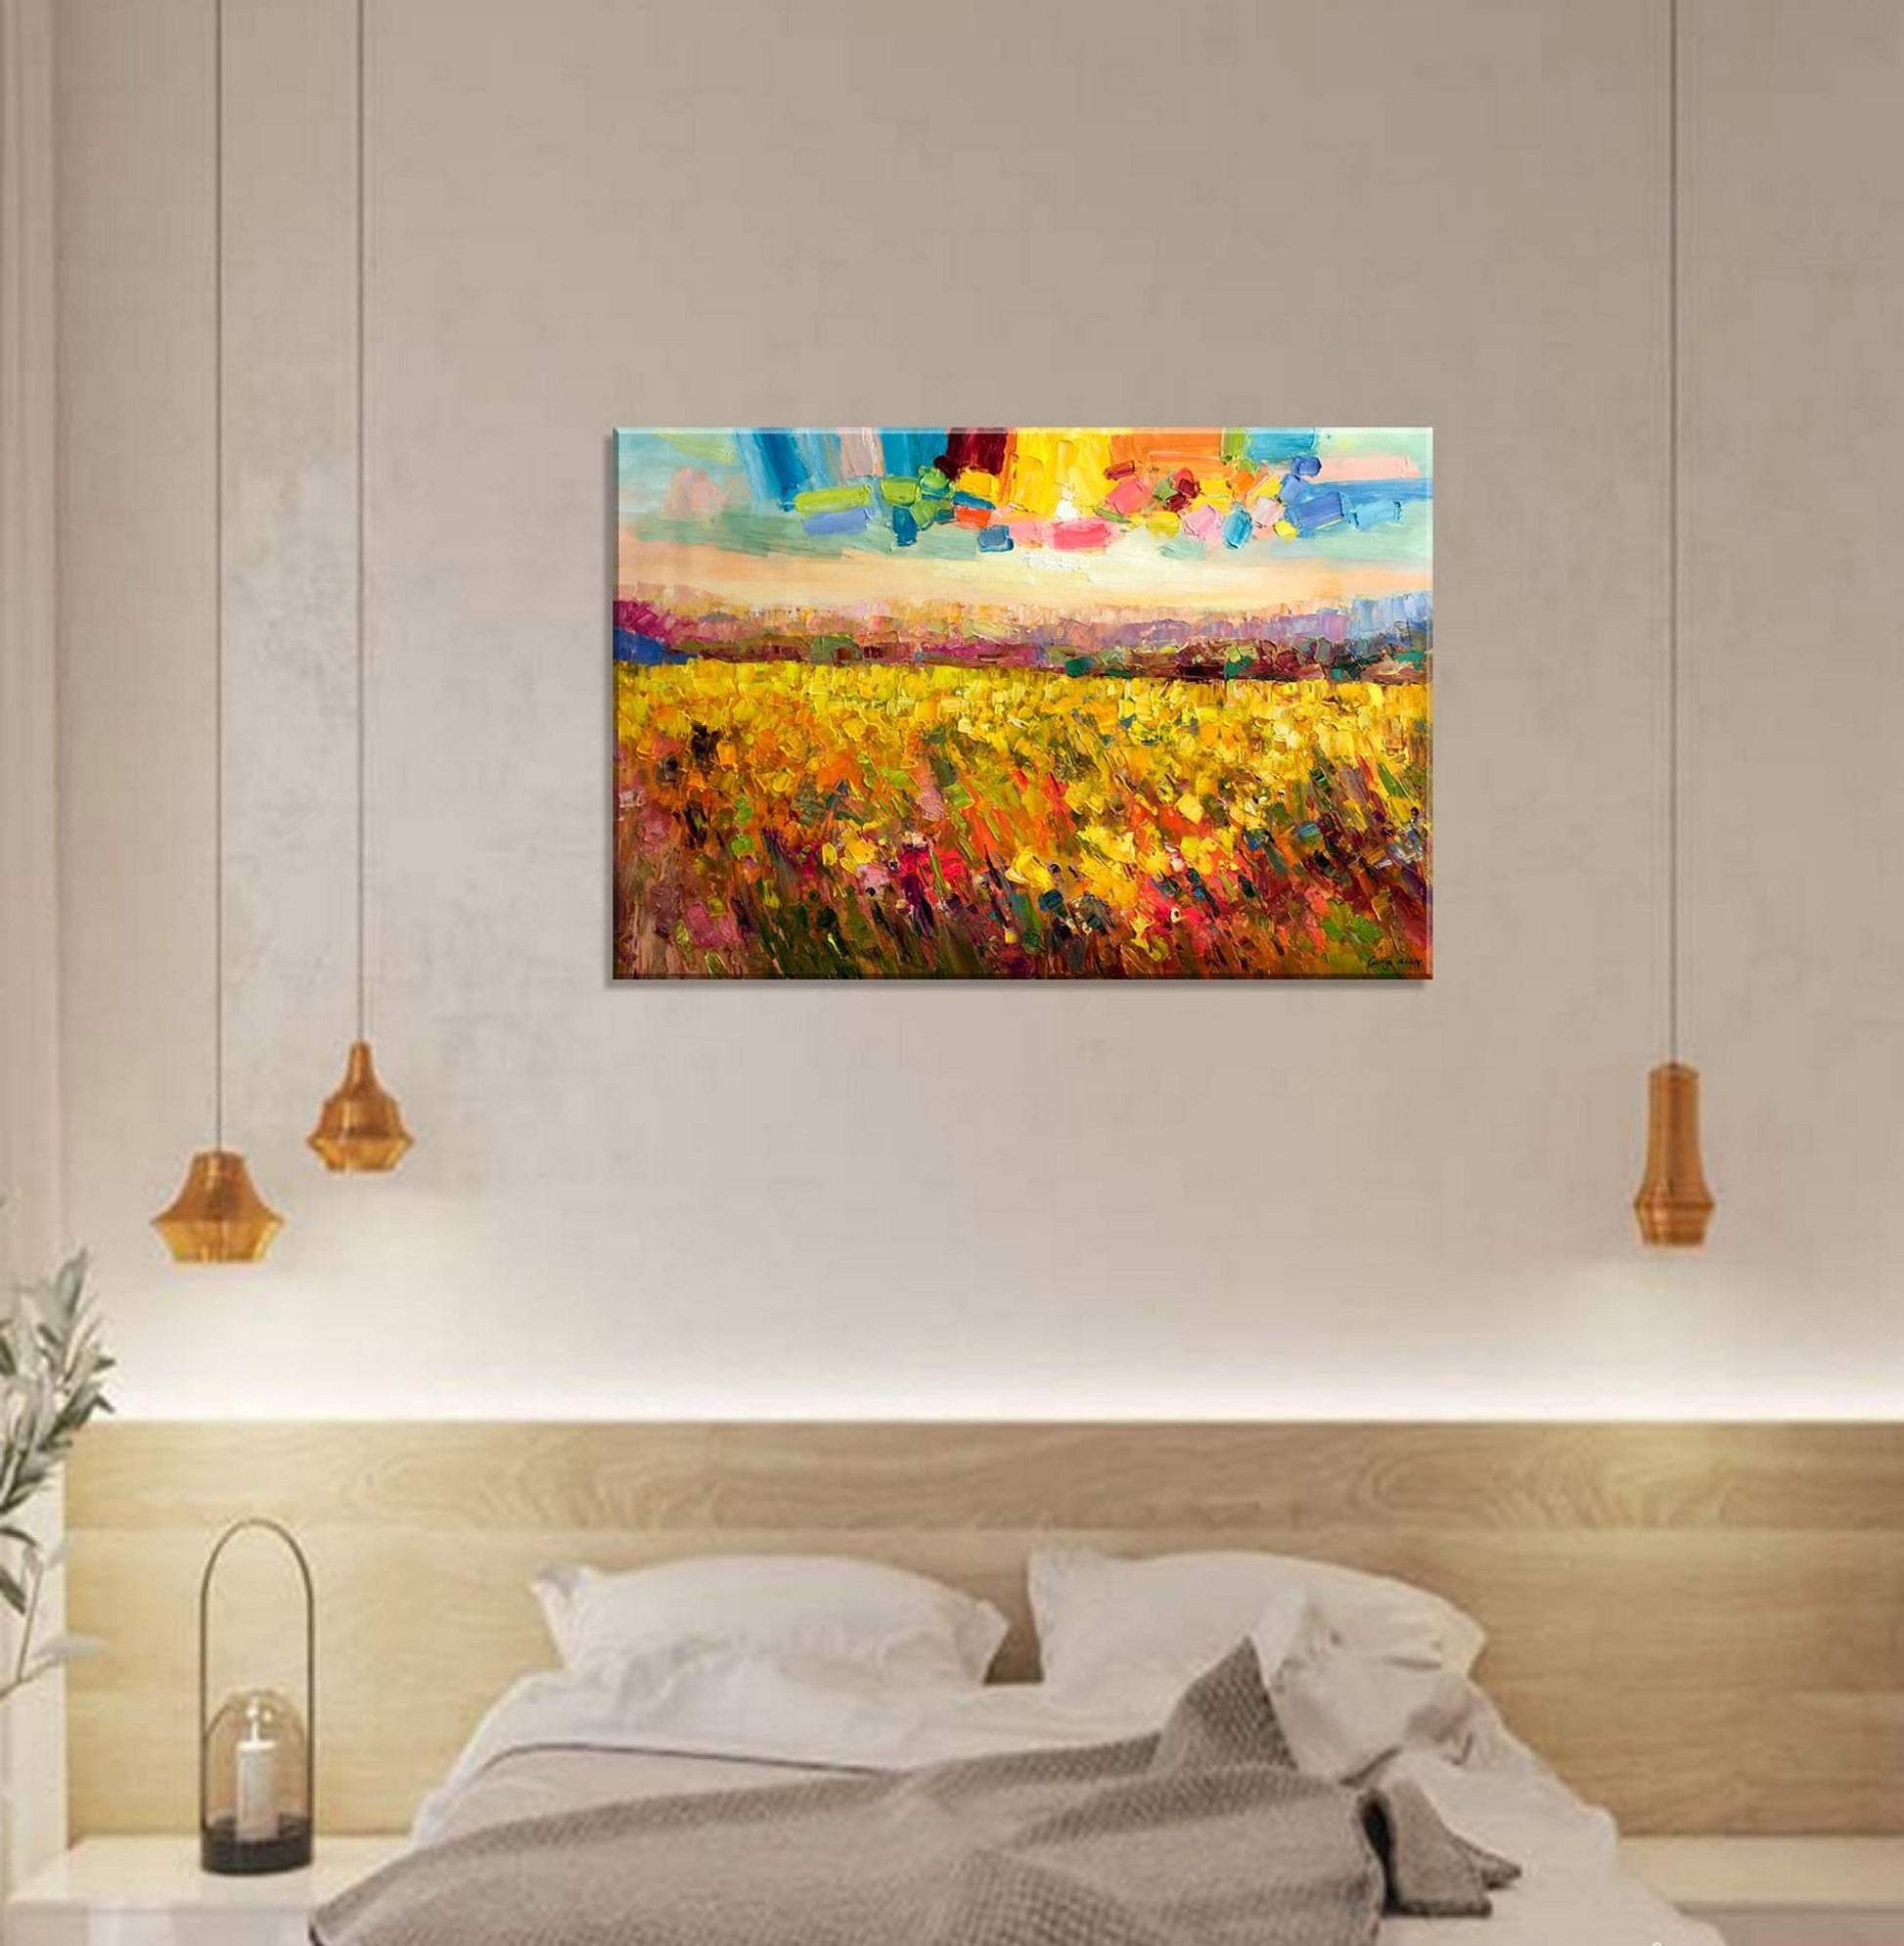 Large Oil Painting Landscape, Livingroom Wall Decor, Abstract Painting, Large Abstract Art, Landscape Painting, Contemporary Art, Canvas Art